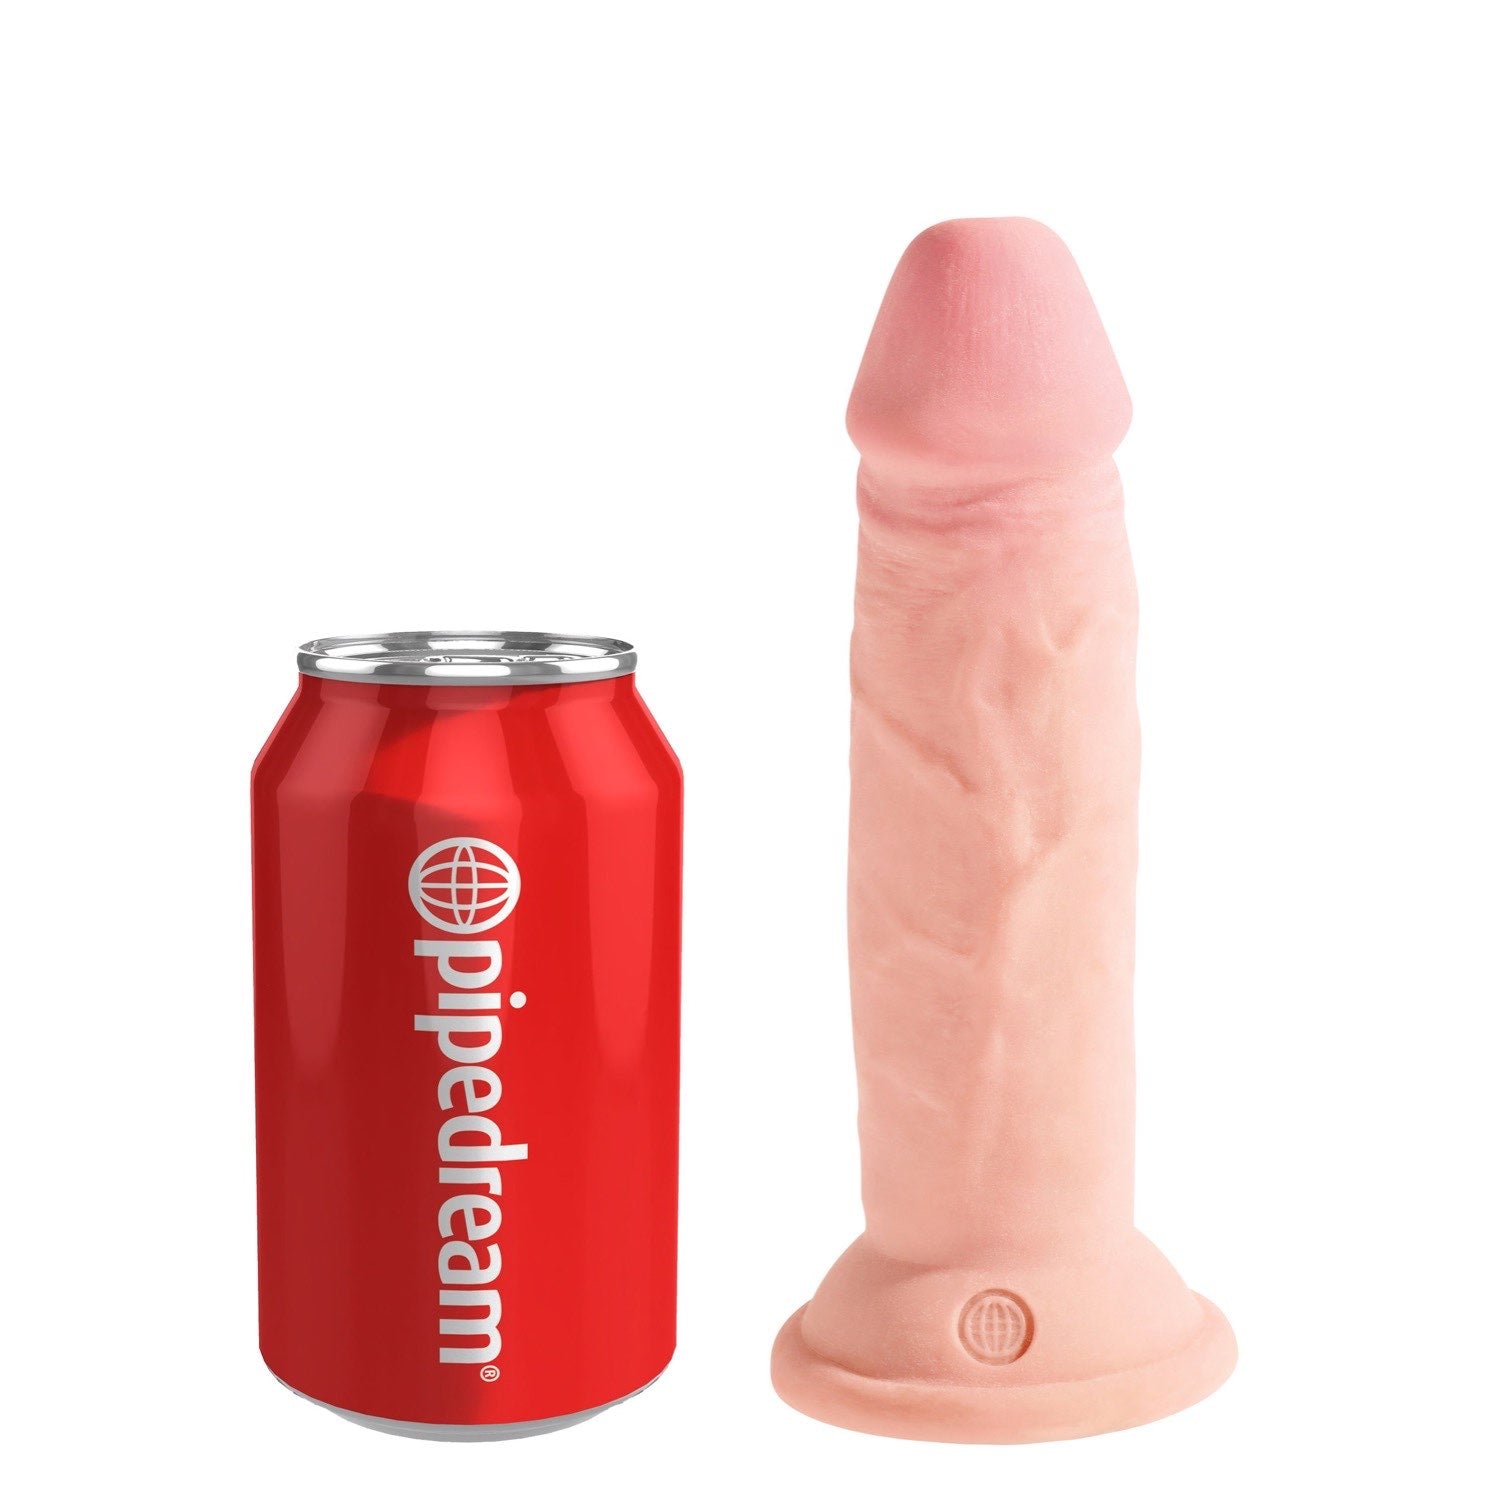 King Cock Plus 6&quot; Triple Density Cock - Flesh 15.2 cm Dong by Pipedream